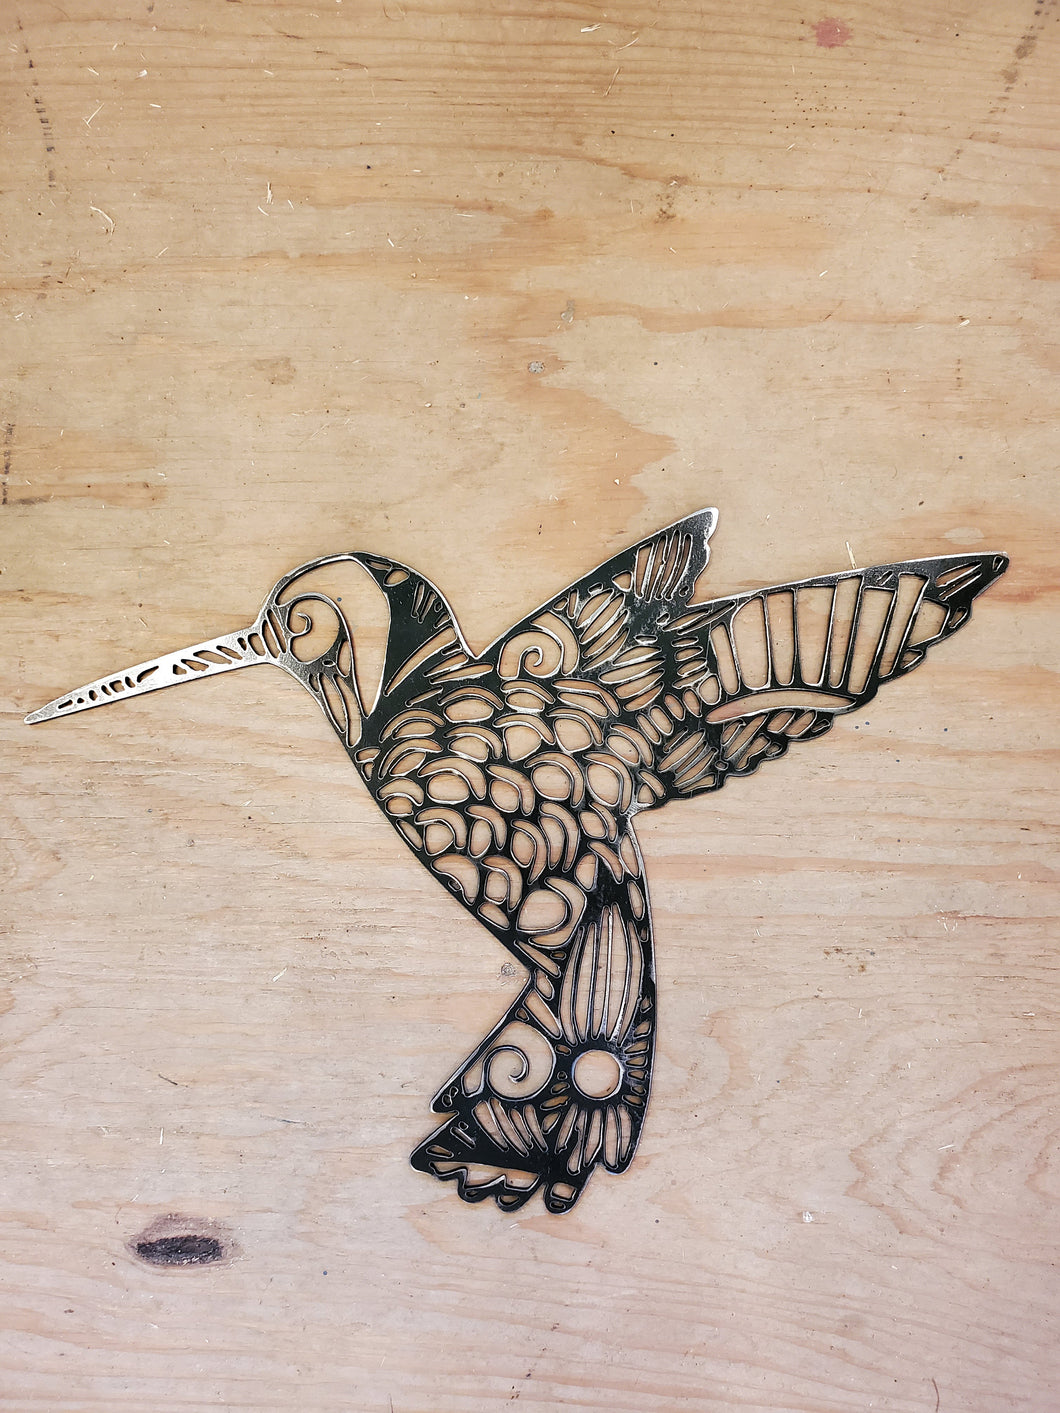 Hummingbird metal wall art - available in extra thick 10ga or sturdy 14ga steel - 16